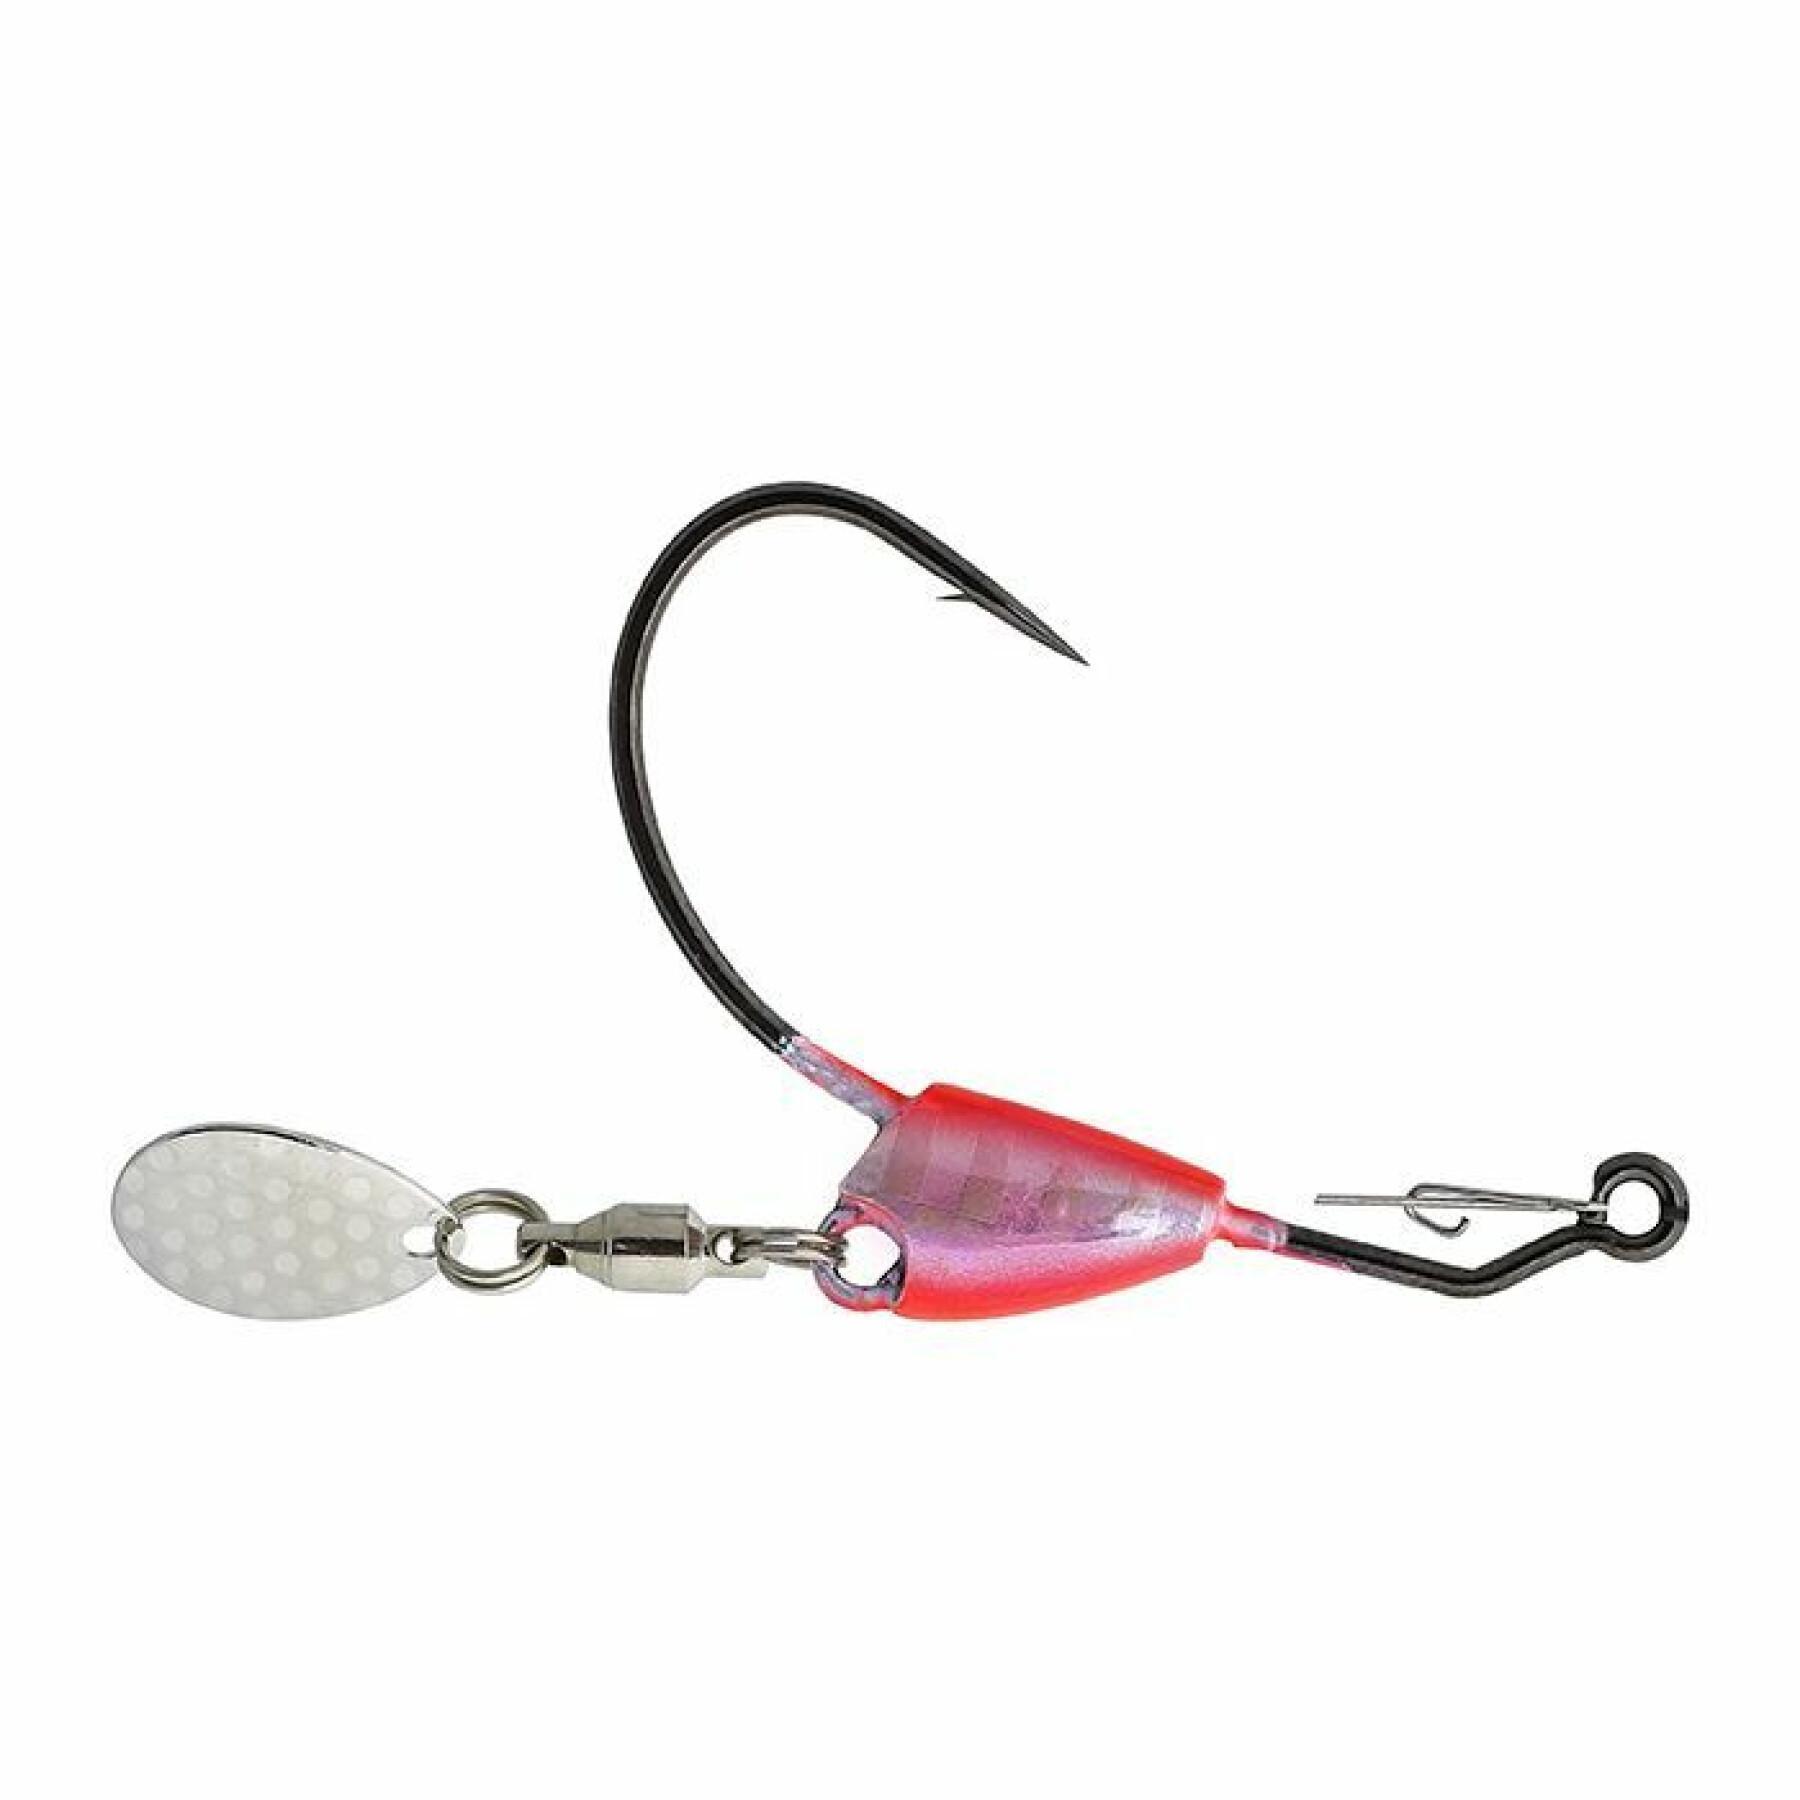 Loodkop Duo Tetra Works The Rock Spin Hook 3,5g